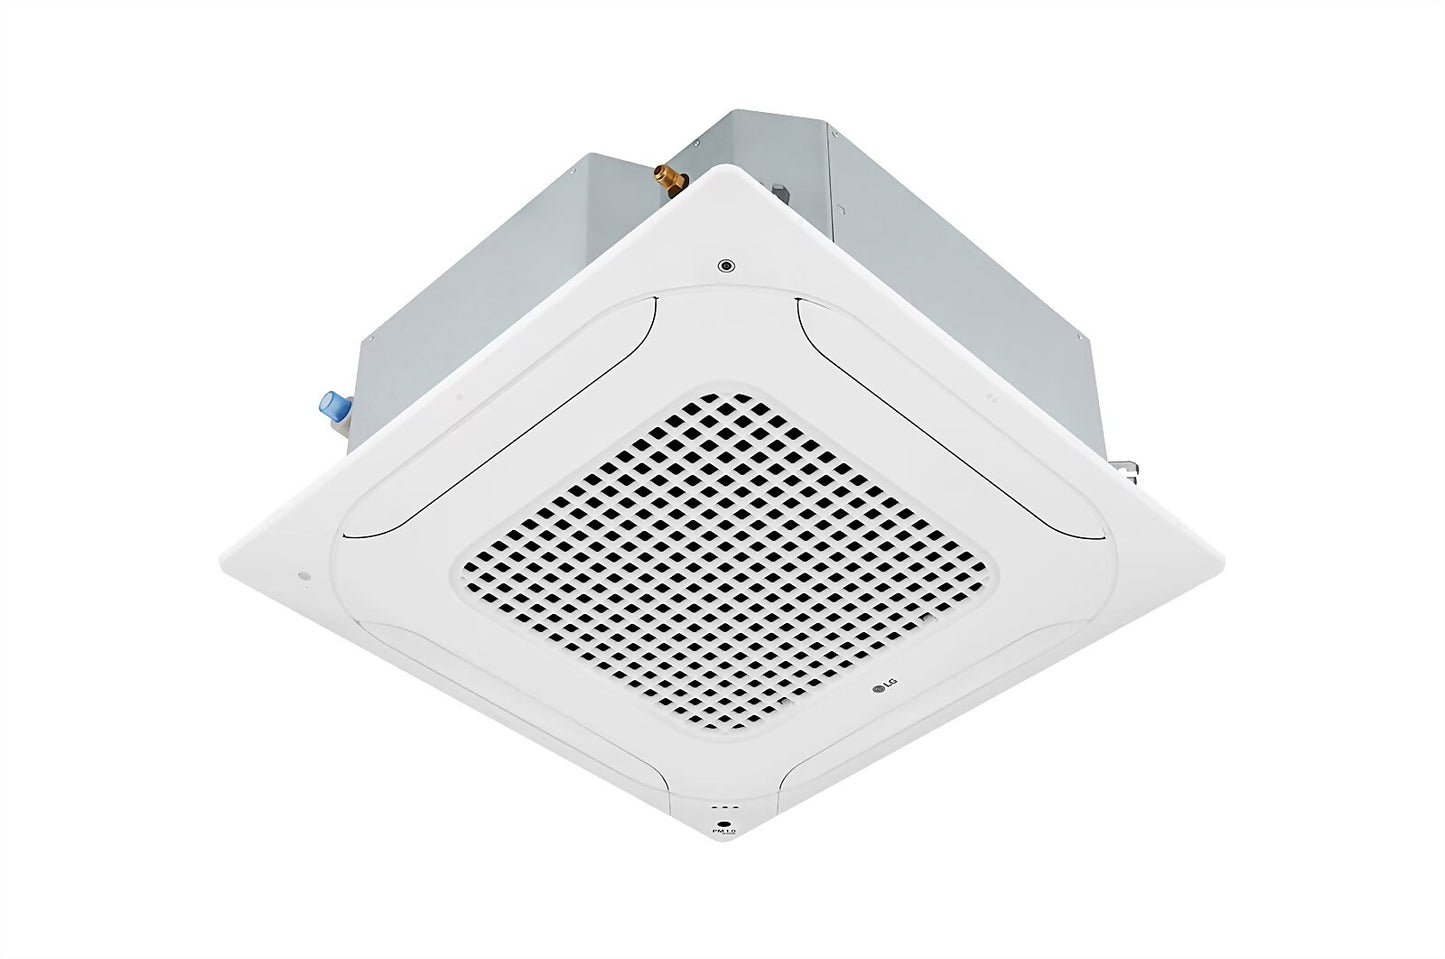 LG Ceiling Mounted 4 Way Cassette Inverter AC 8.2KW with Advanced Air Purification and Independent Vane Control - ARNU28GTBB4